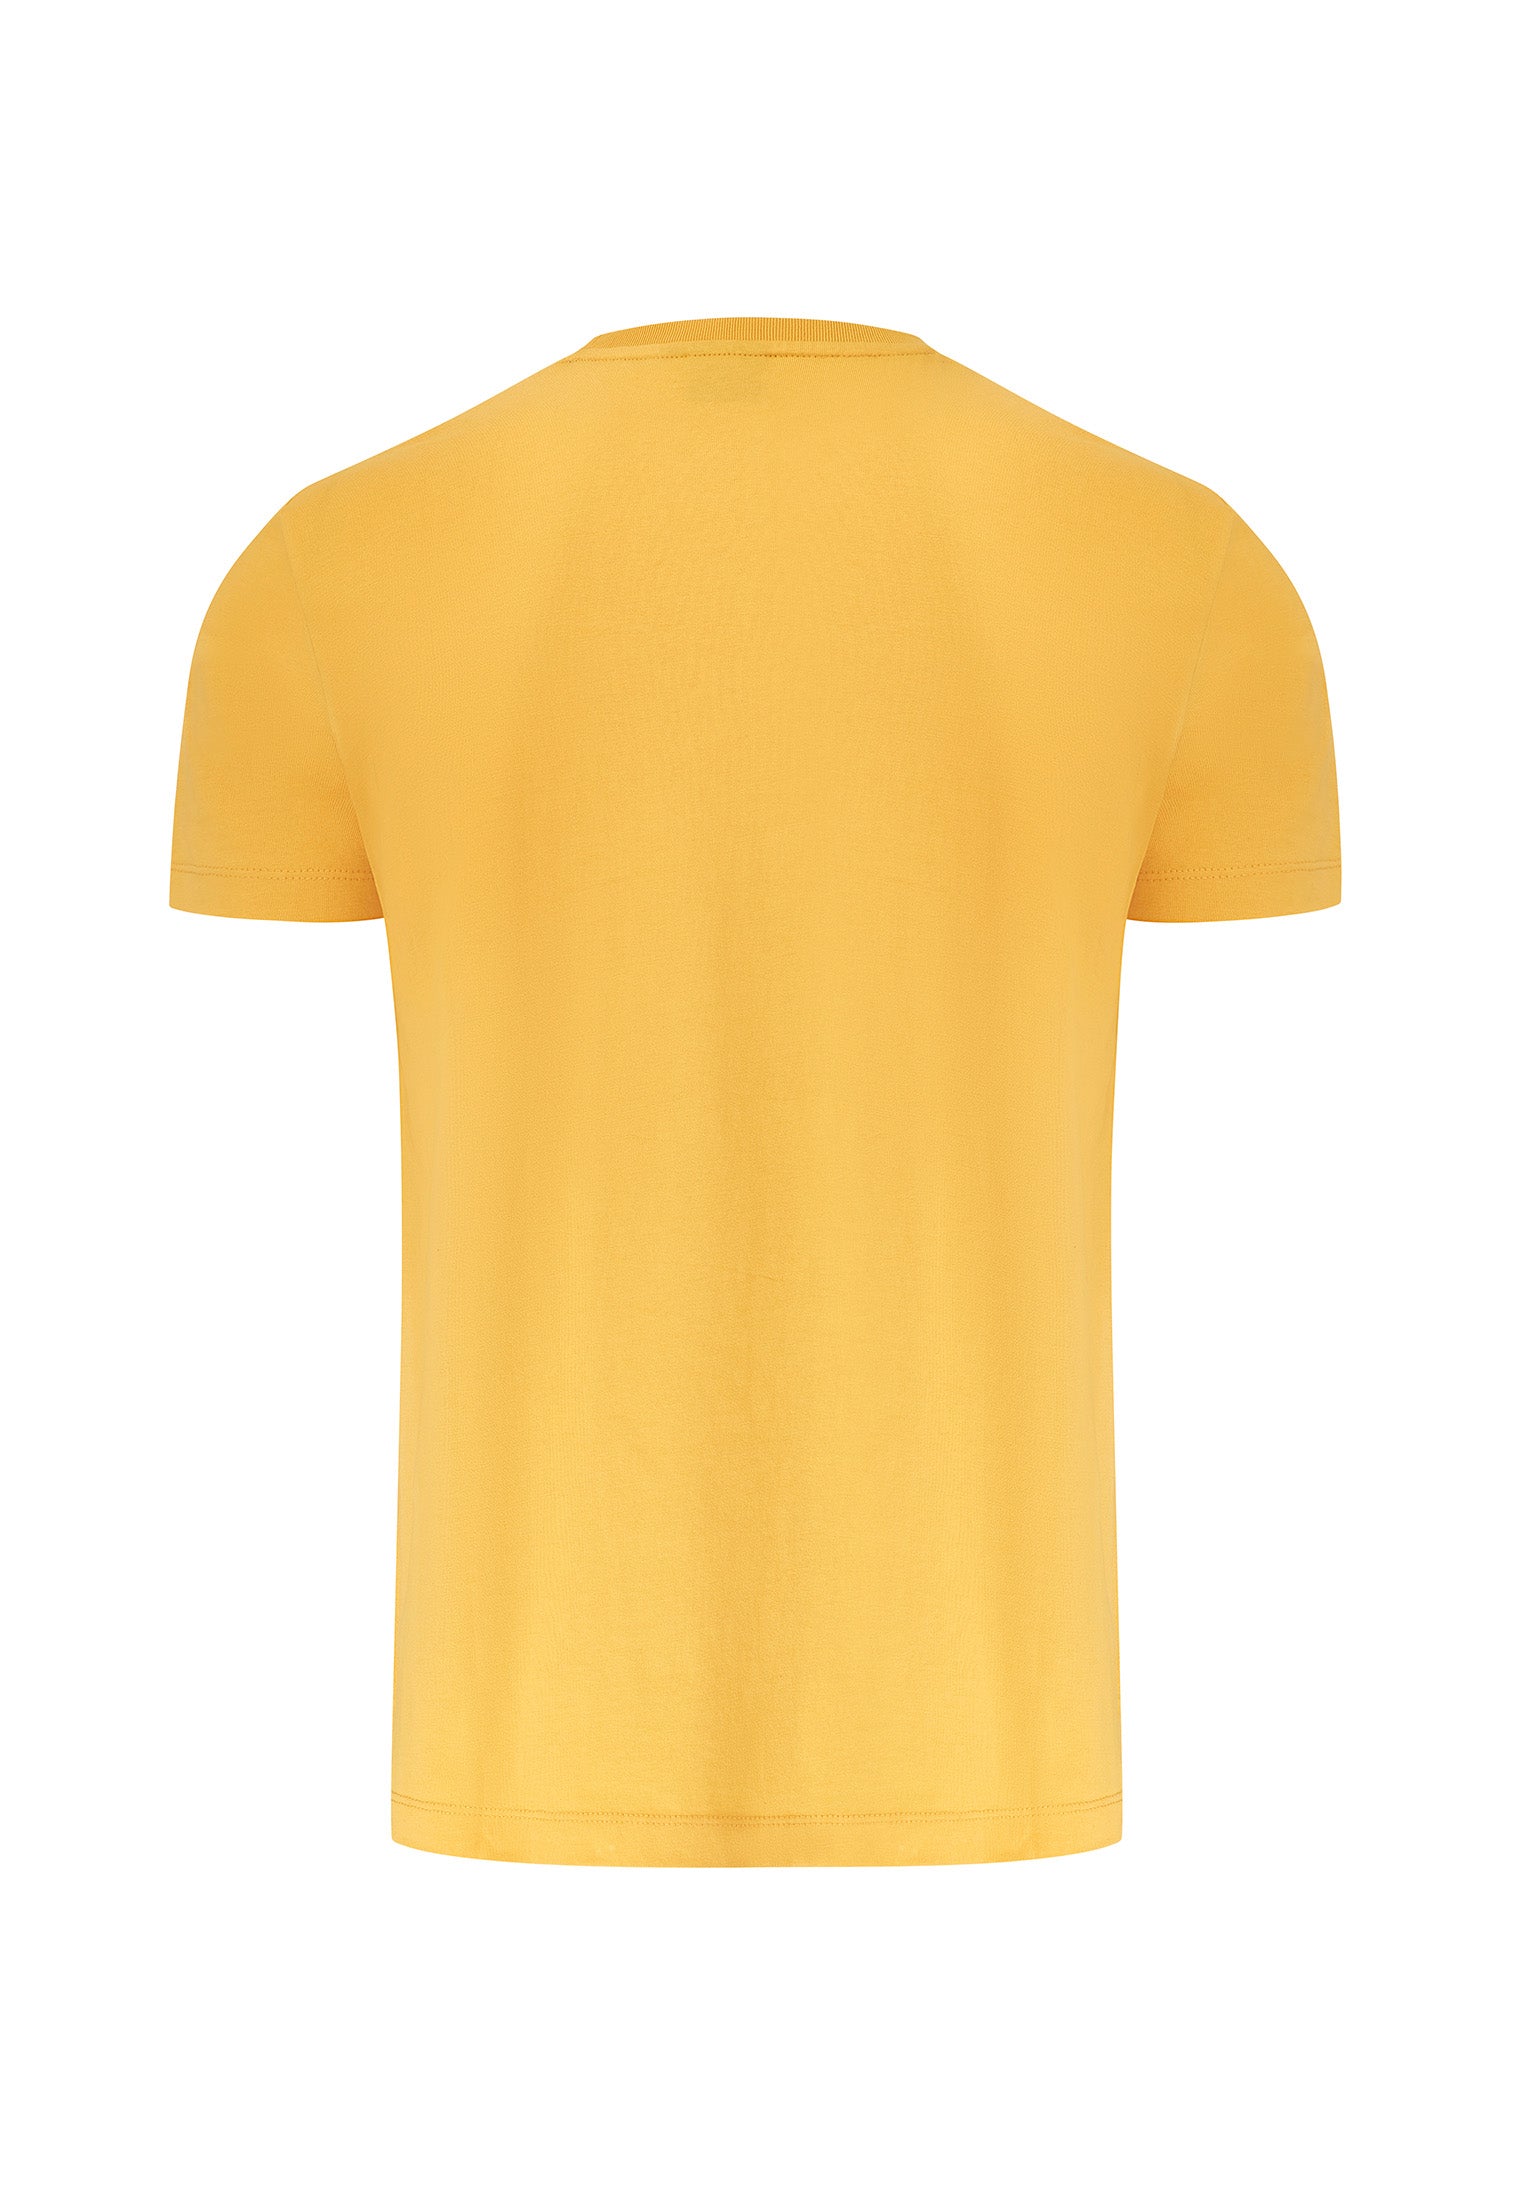 Printed T-Shirt in Yellow